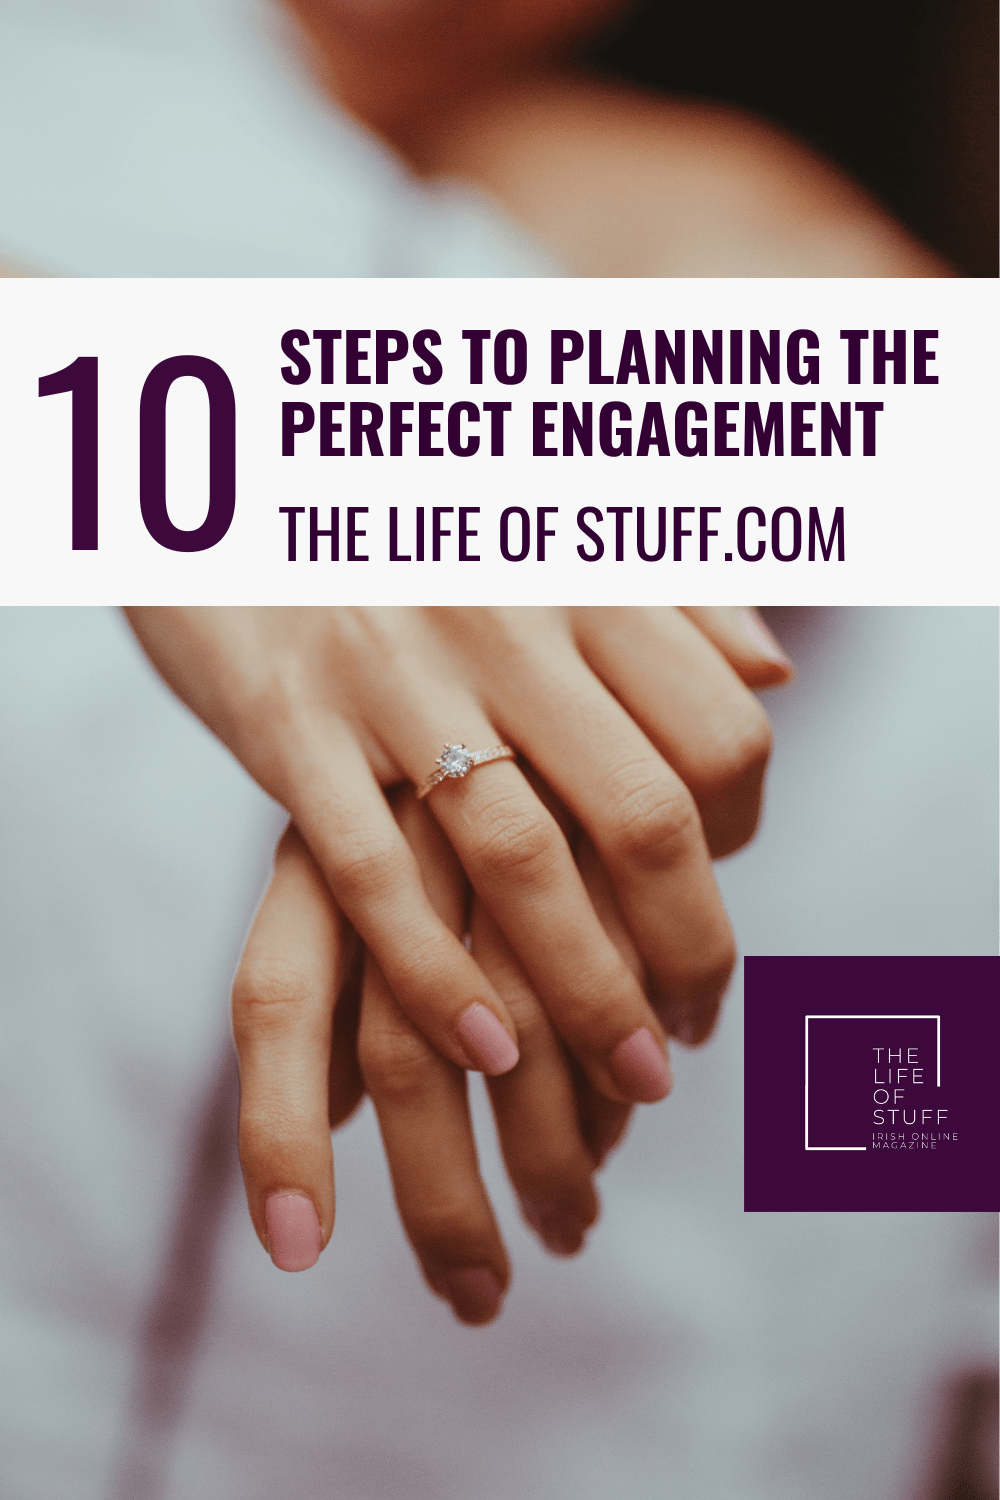 10 Steps To Planning The Perfect Engagement - The Life of Stuff